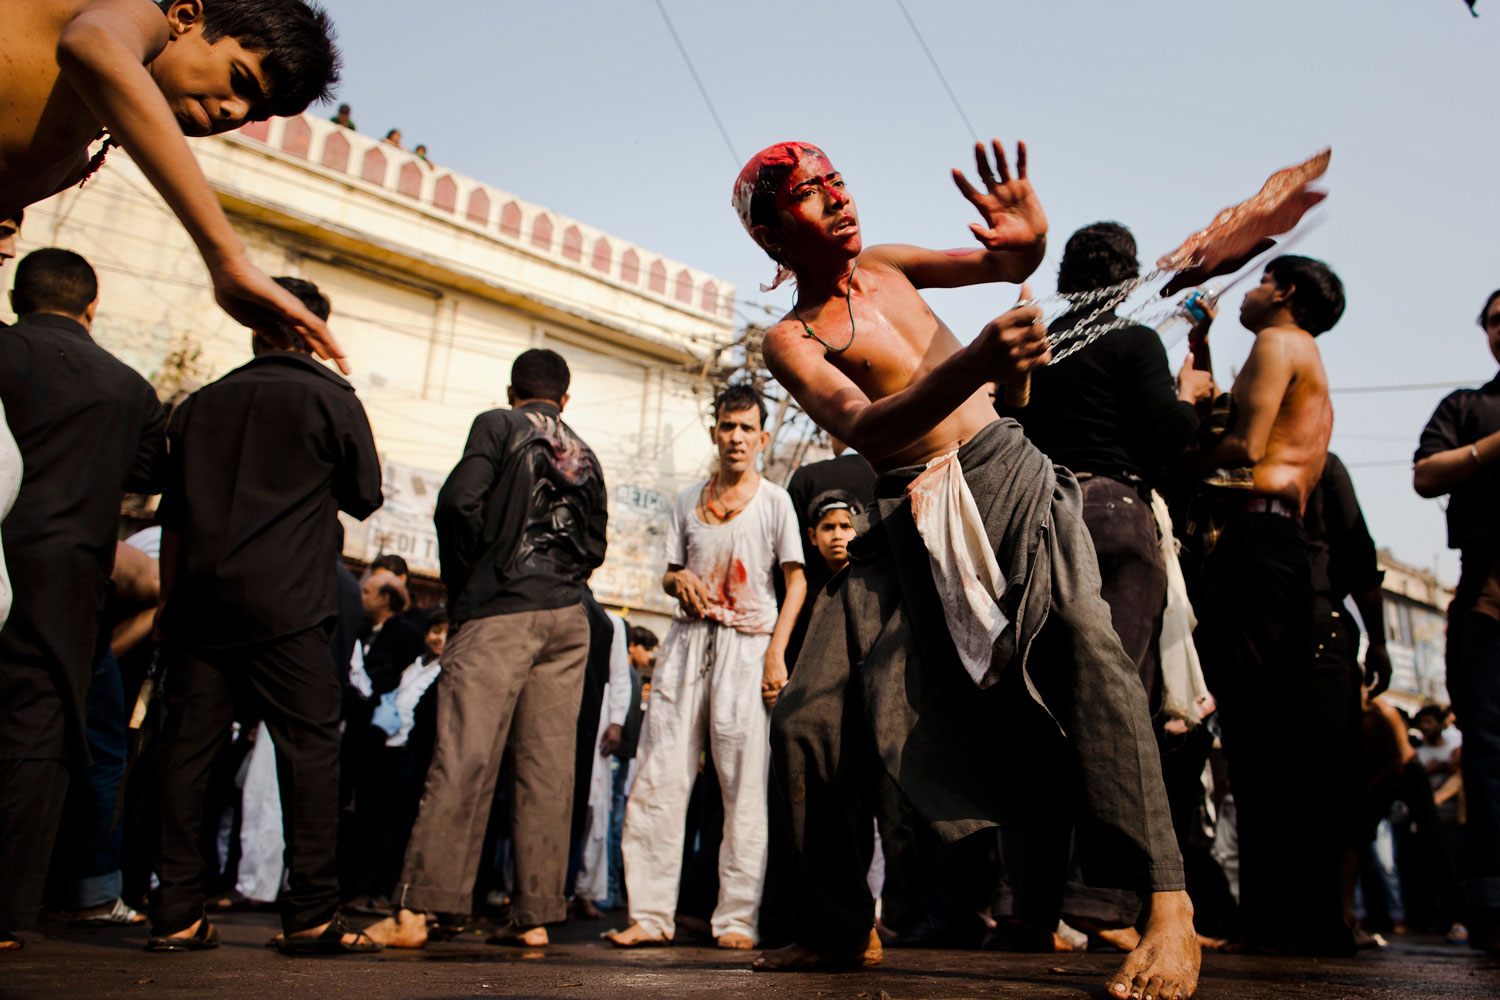 December 6, 2011. Shi'ite Muslim boys beat their chests as they practice self-flagellation during the religious ritual of Ashura in New Delhi, India.